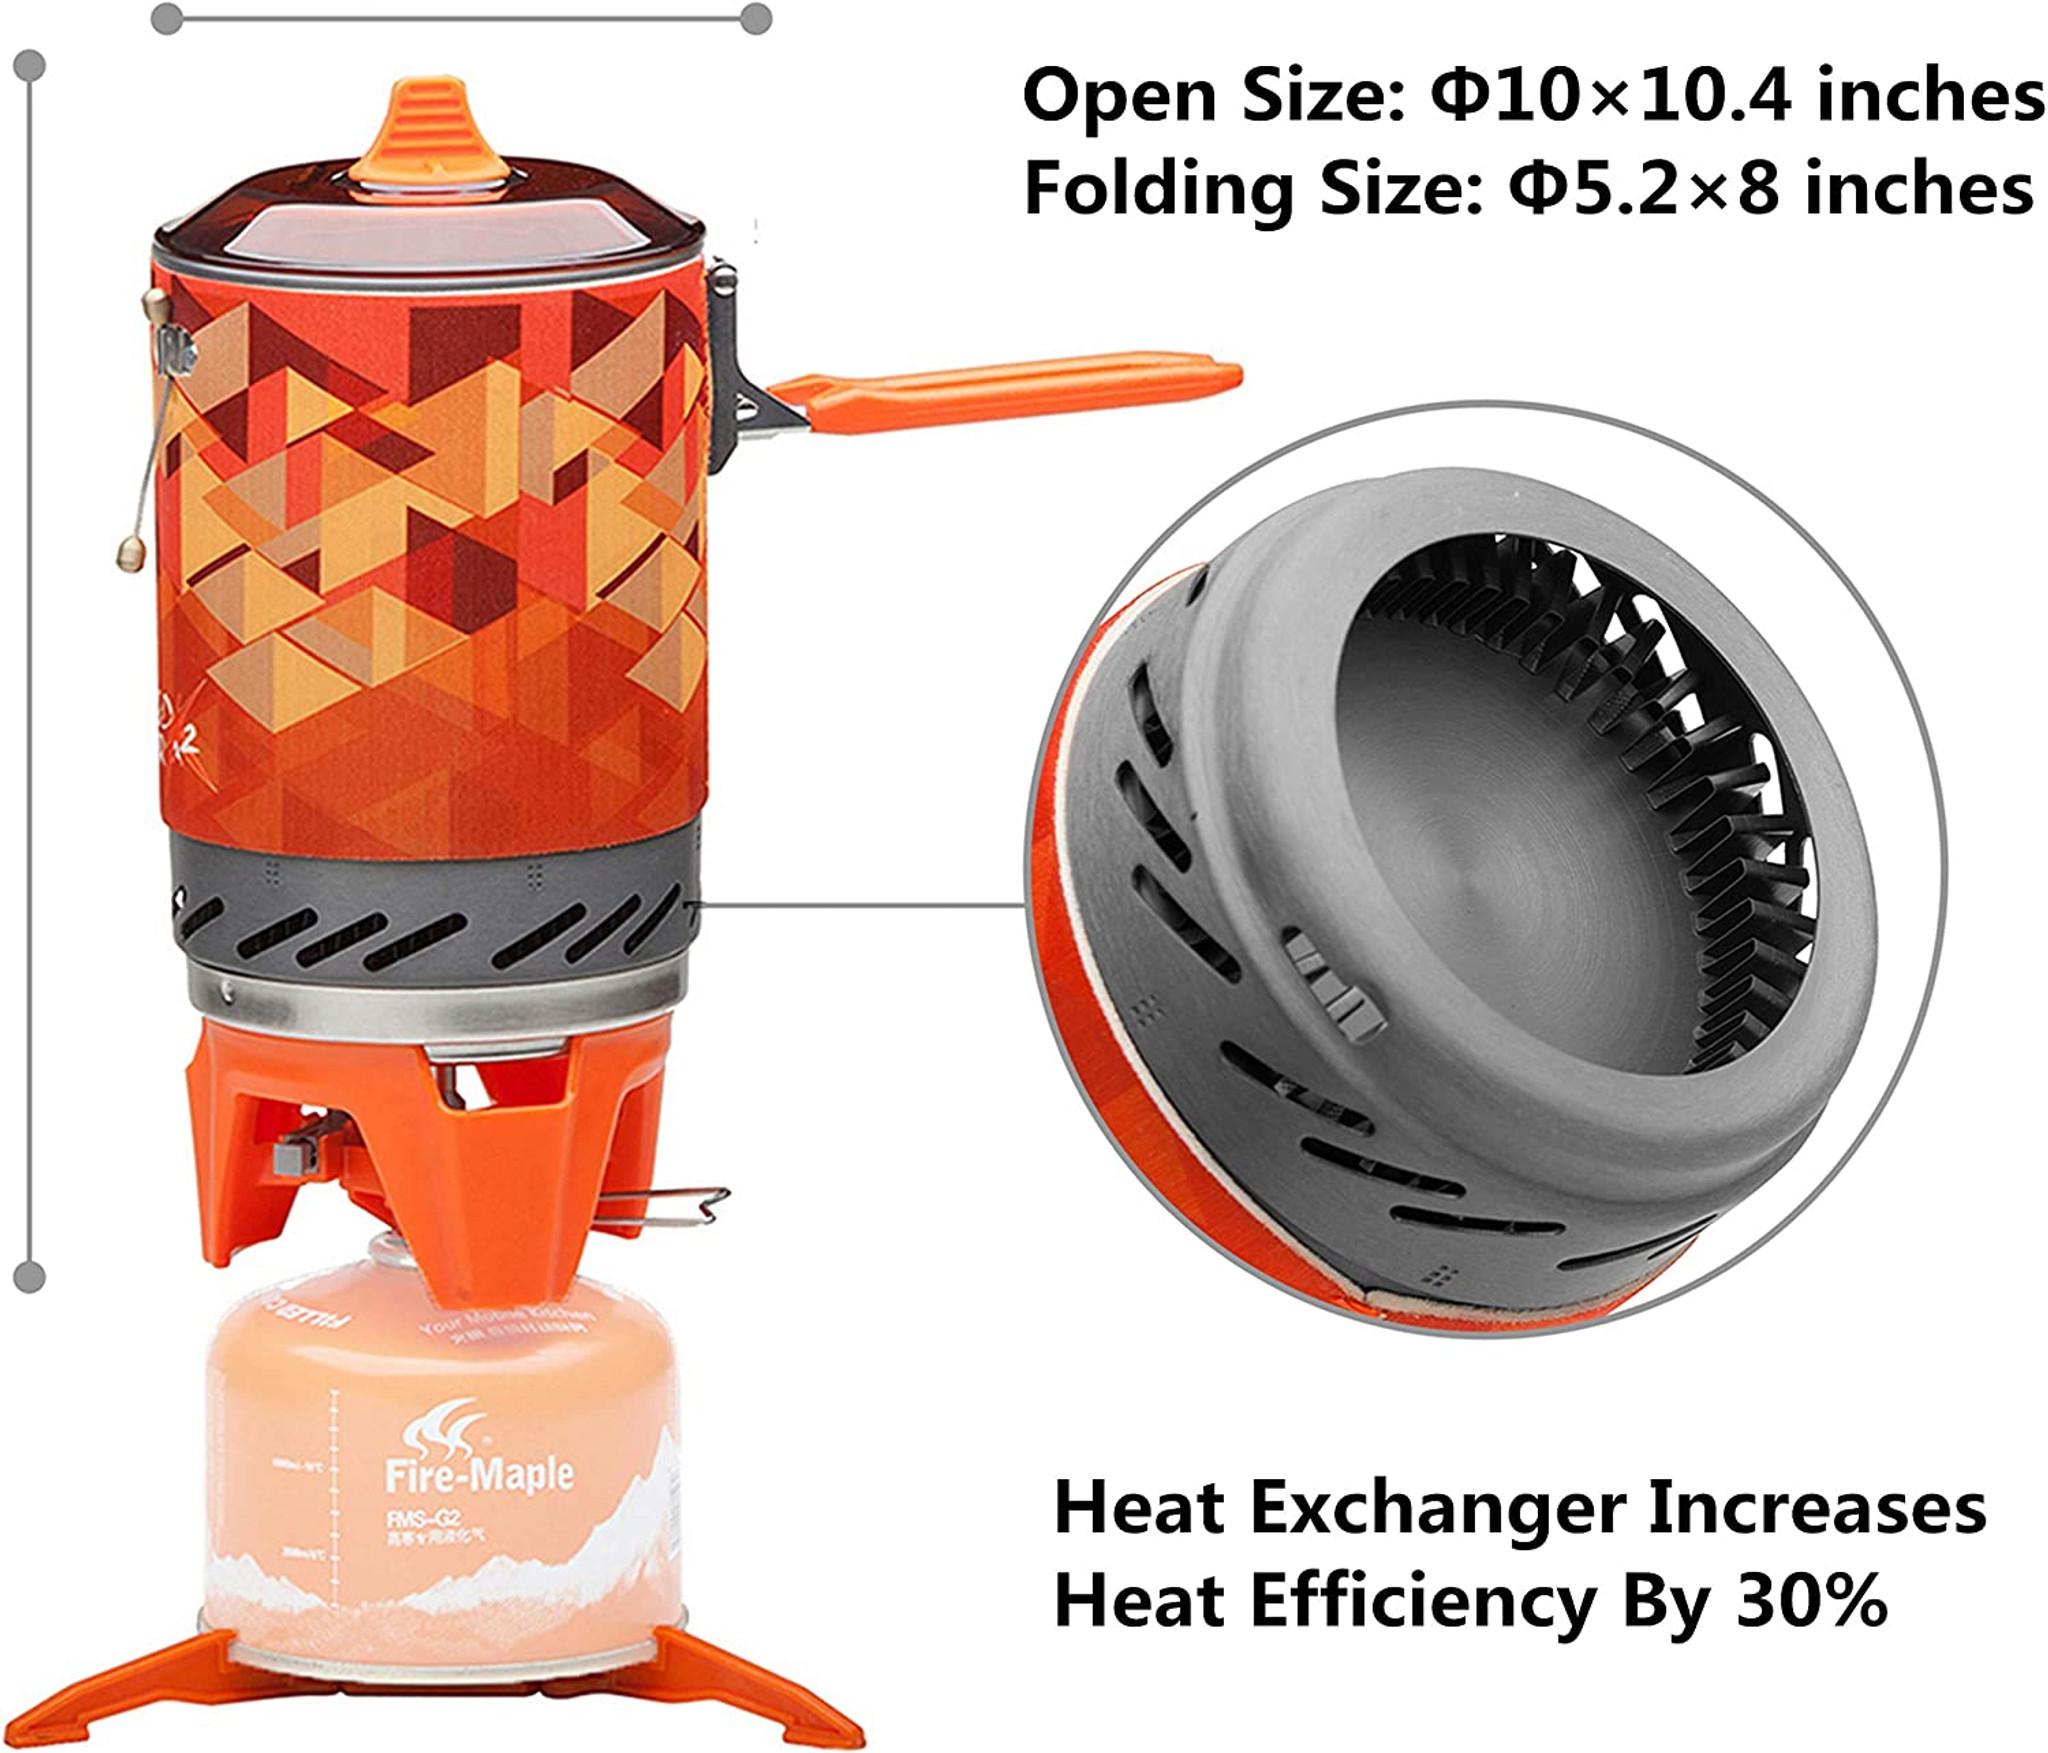 FireMaple Star X2 Cooking System